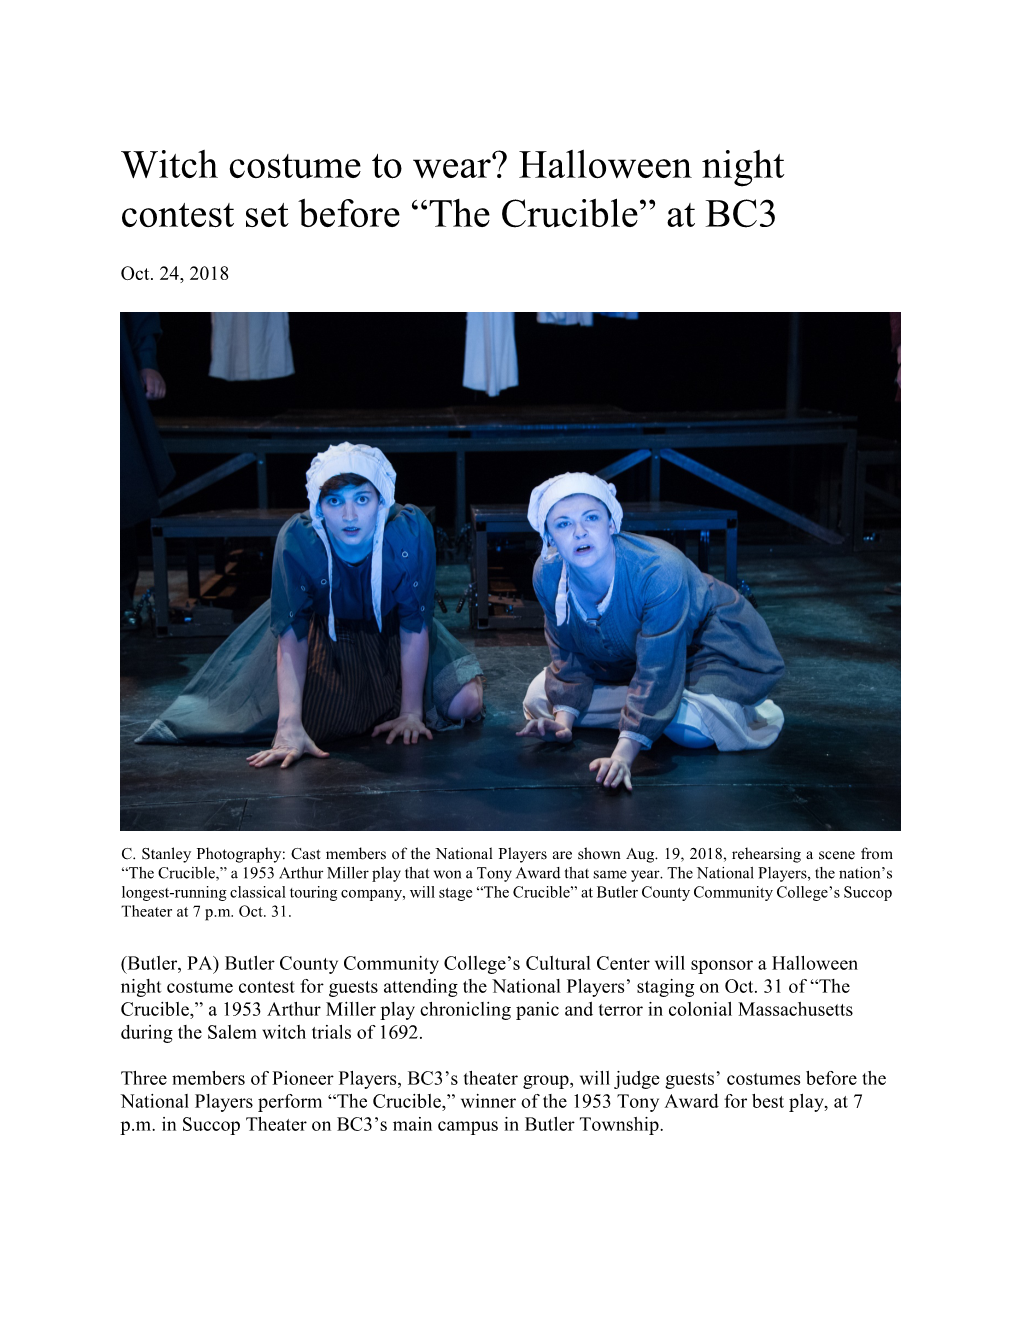 Halloween Night Contest Set Before “The Crucible” at BC3